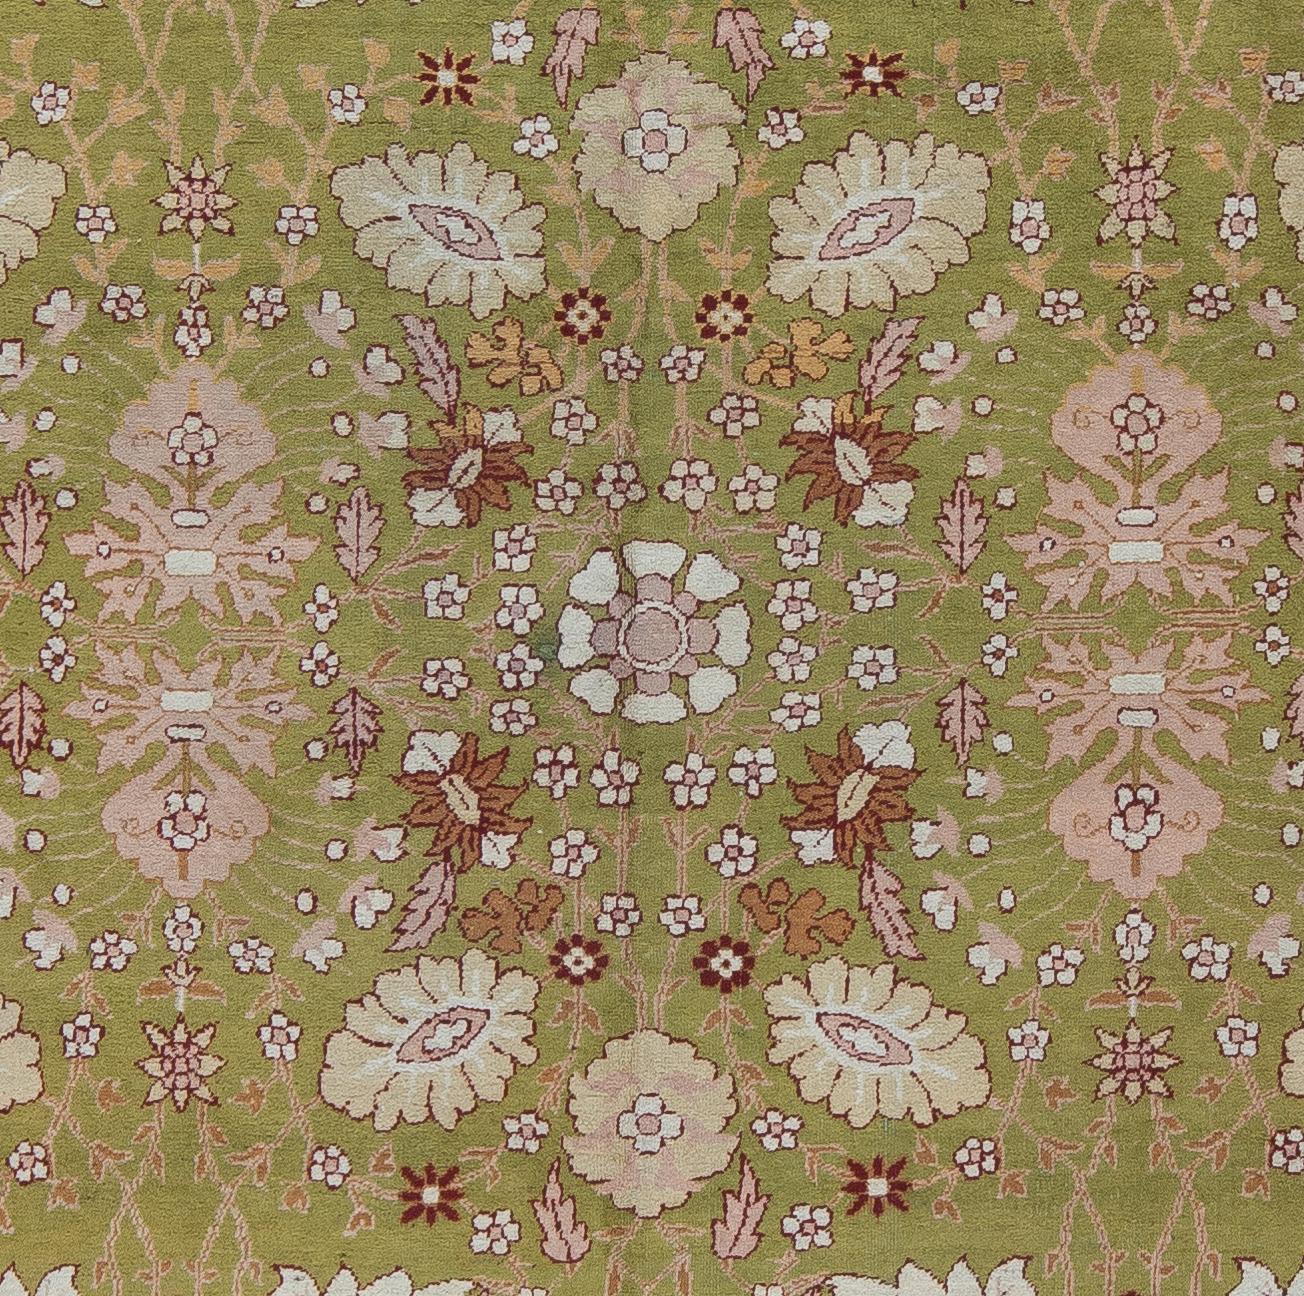 A finely woven Amritsar carpet with a rare avocado green field and soft pink border. An open, all-over floral design. A medium, soft wool pile that is fantastic under foot. This turn of the century carpet is naturally dyed and in beautiful condition